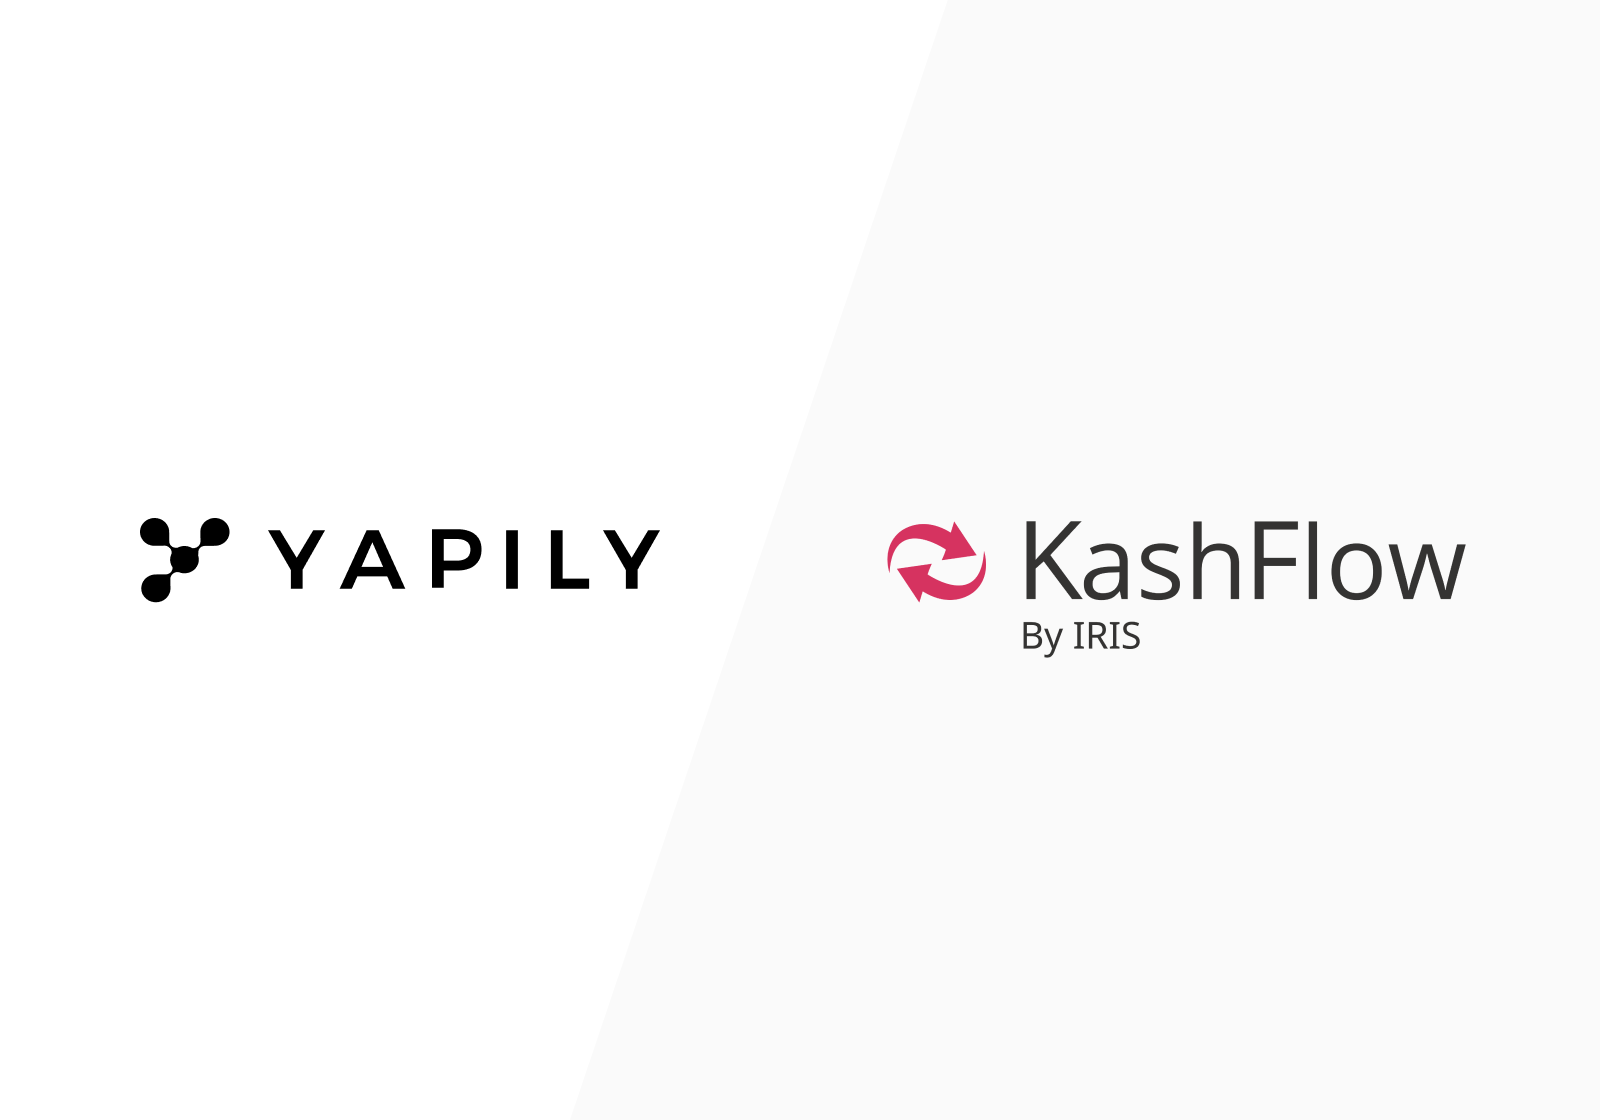 KashFlow by IRIS Software Group, is working with leading enterprise connectivity platform Yapily. The partnership will enable KashFlow customers to gain real-time insight into cash flow and provide them with a frictionless bookkeeping service. 